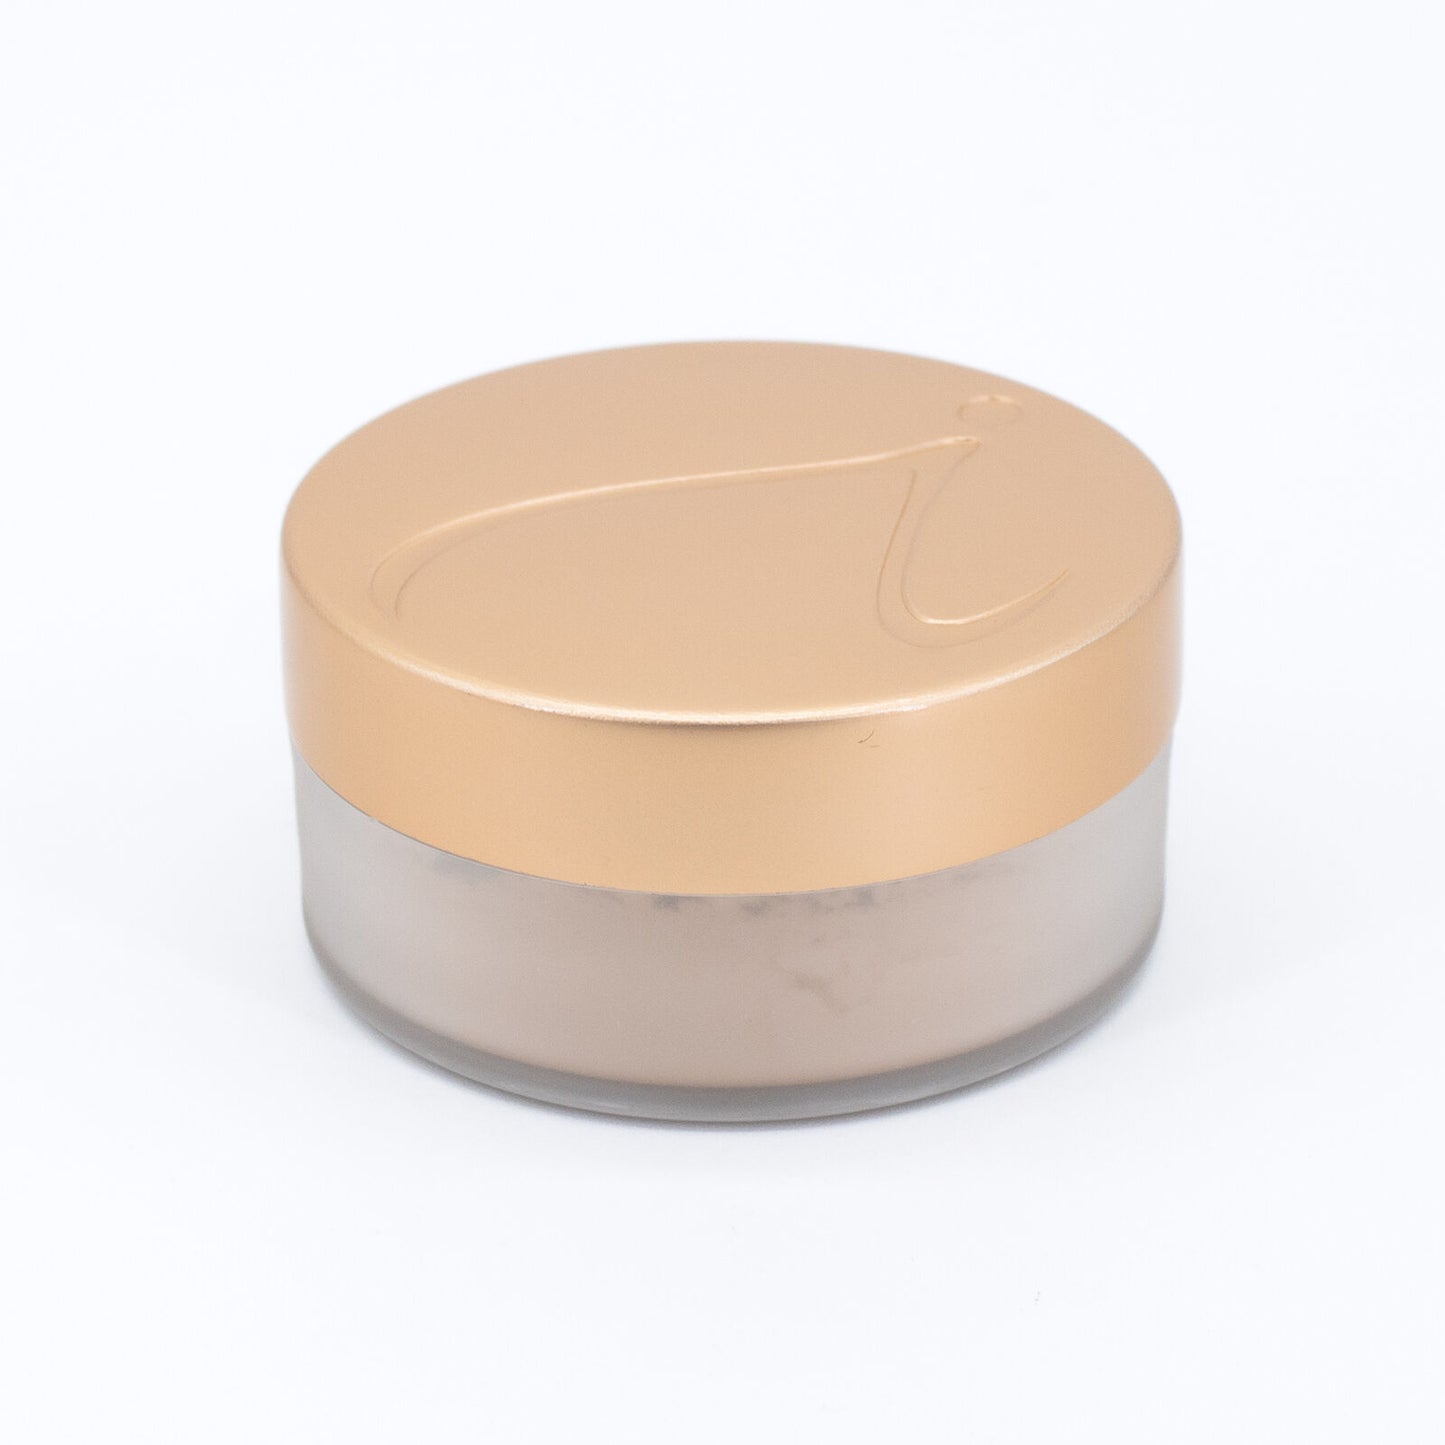 jane iredale Amazing Base Loose Mineral Powder NATURAL 0.37oz - Imperfect Box